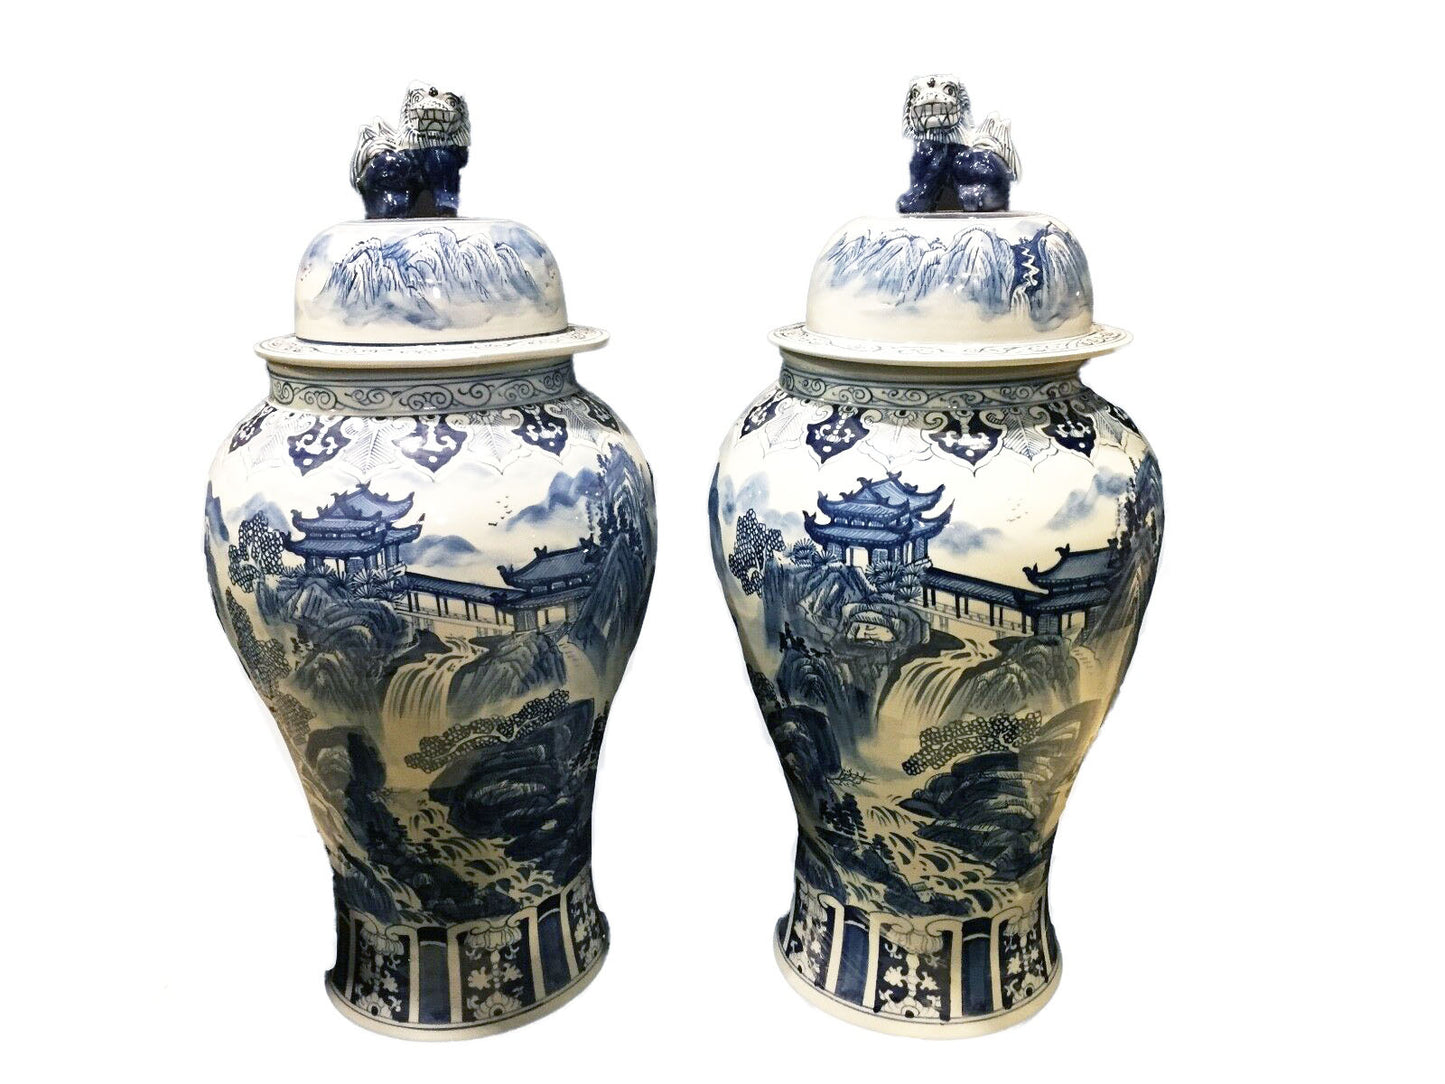 #954 Large Chinese B & W Porcelain Ginger Jars - a Pair 36 " H